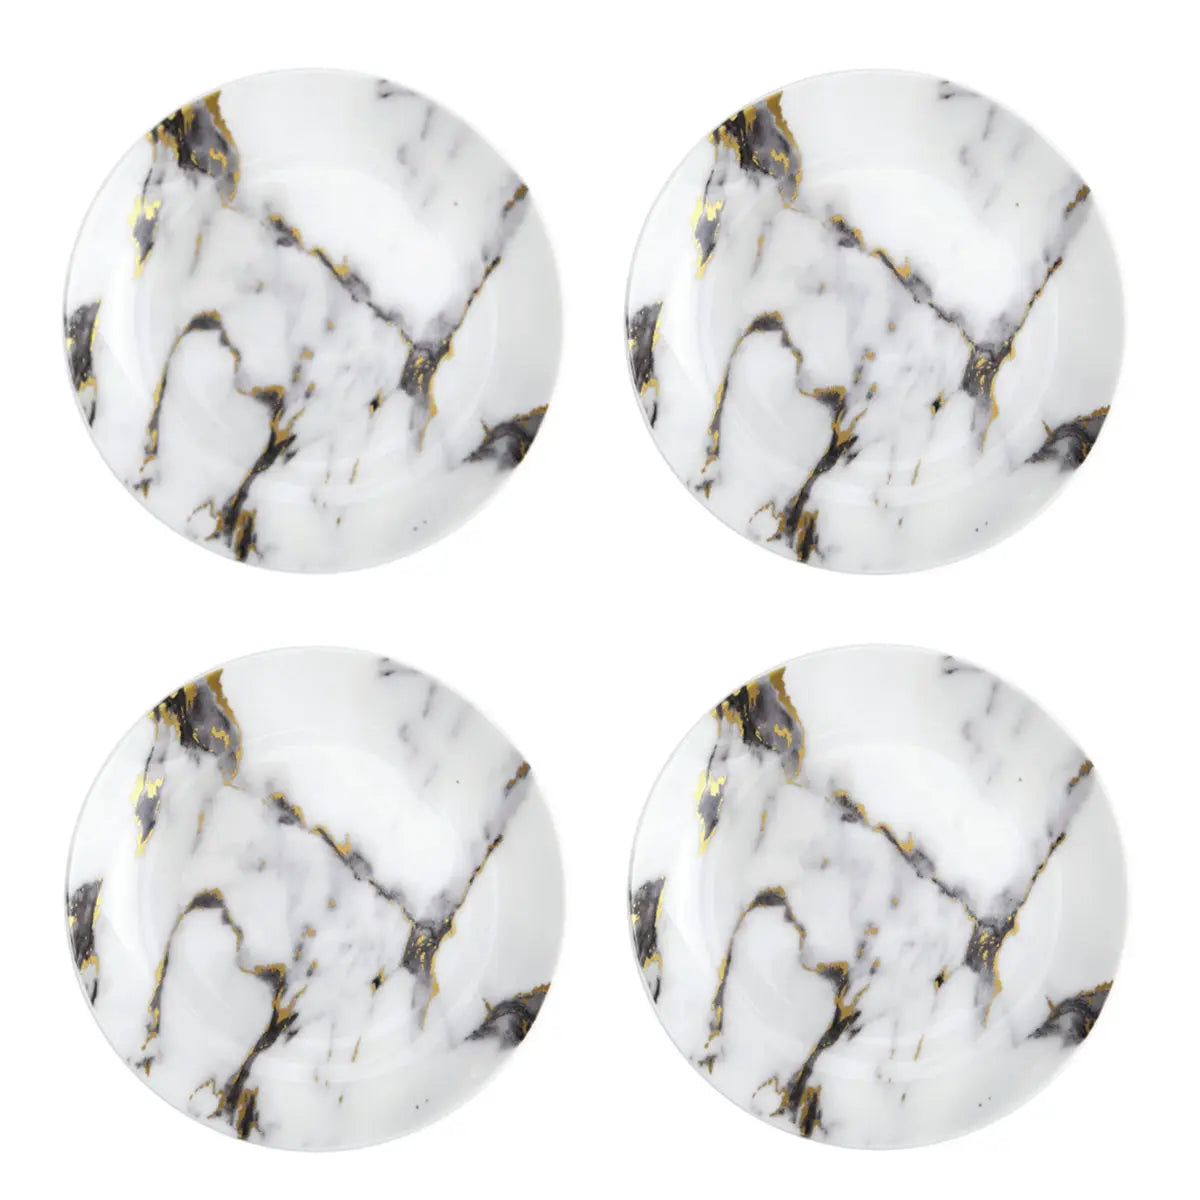 Prouna Marble Venice Fog 6.5 in Canapé Plate- Set of 4.